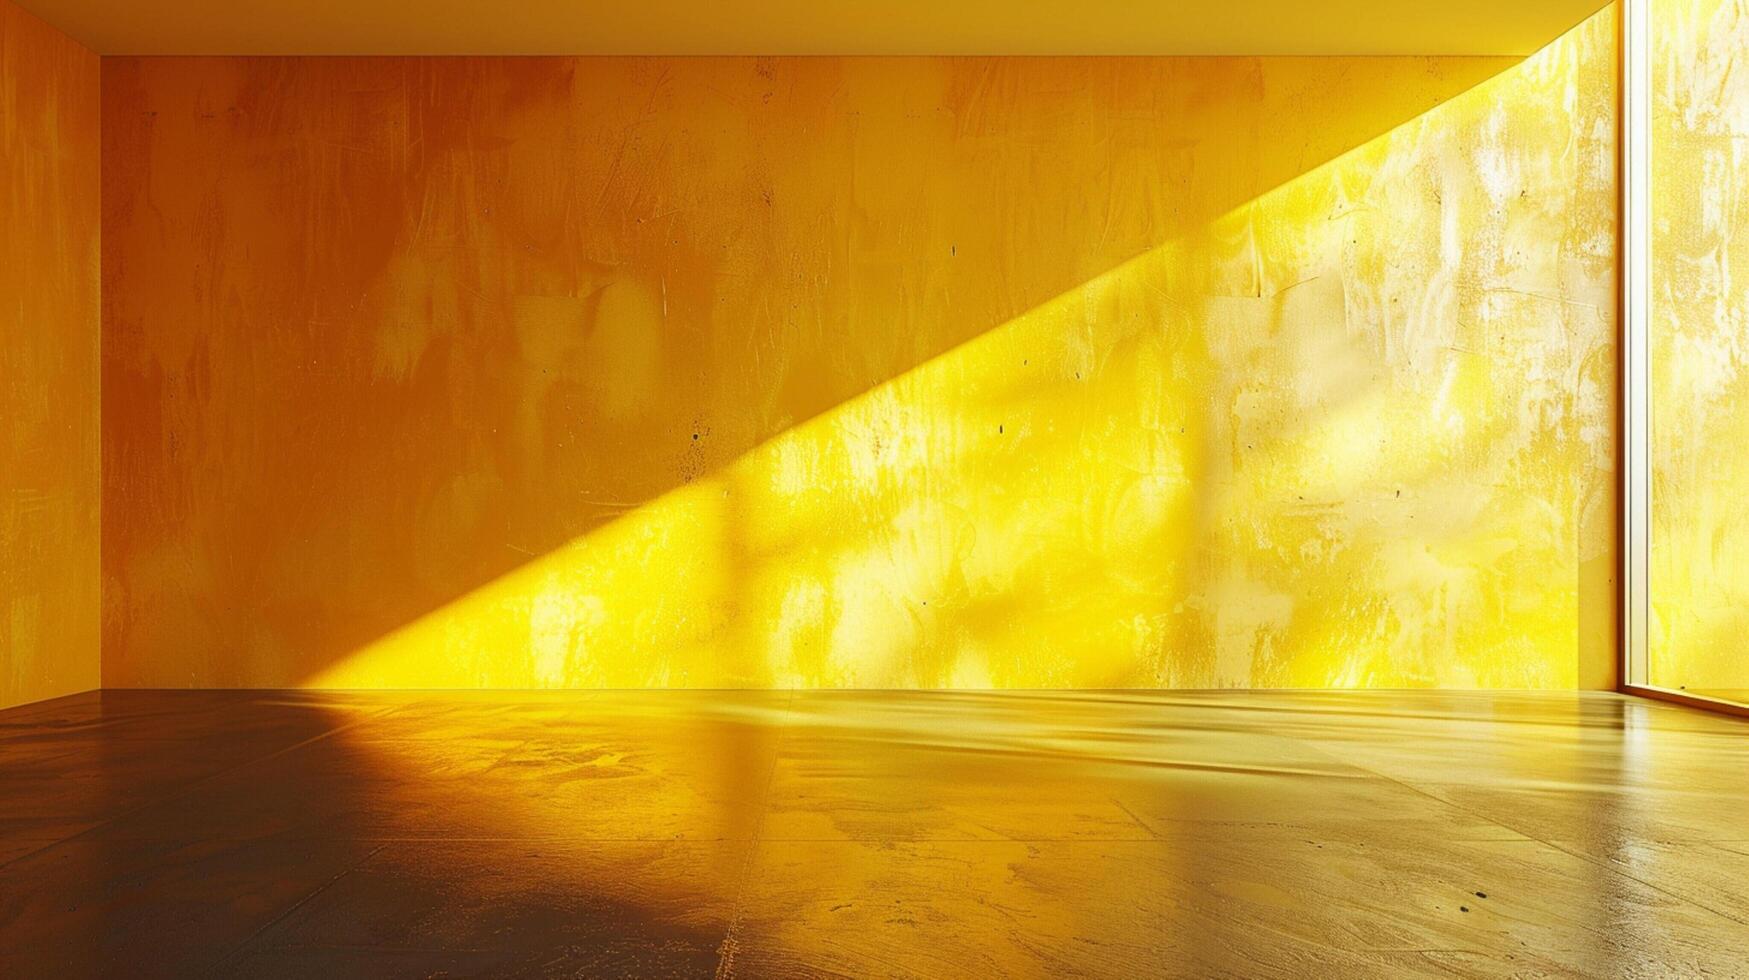 abstract luxury clear yellow wall well use photo